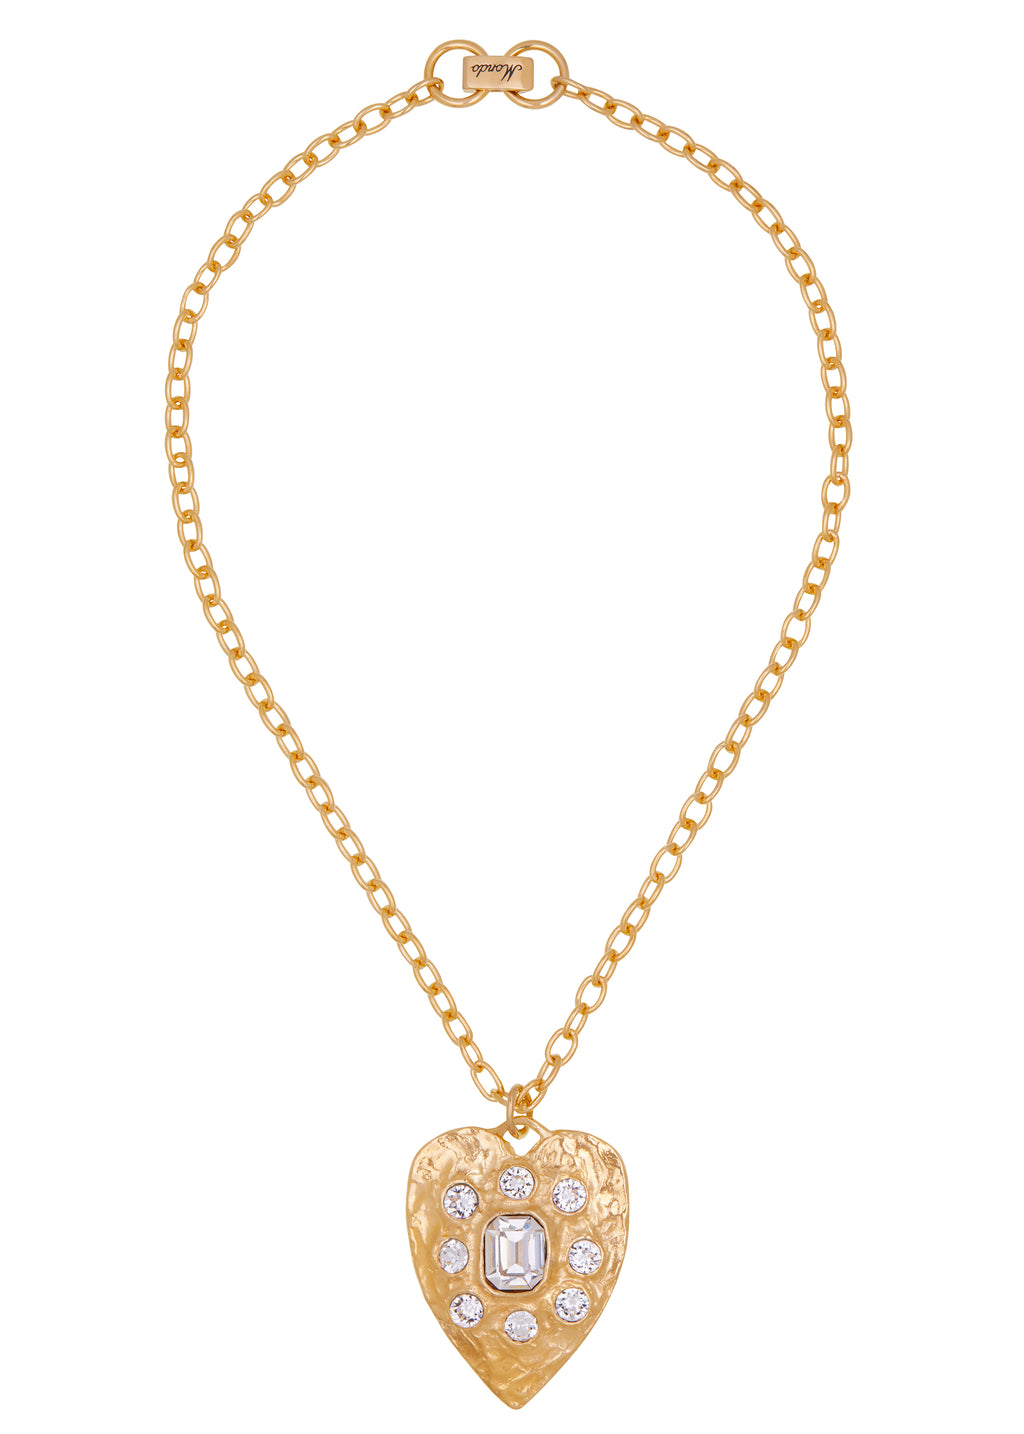 Tropicana Necklace in Gold - Crystal